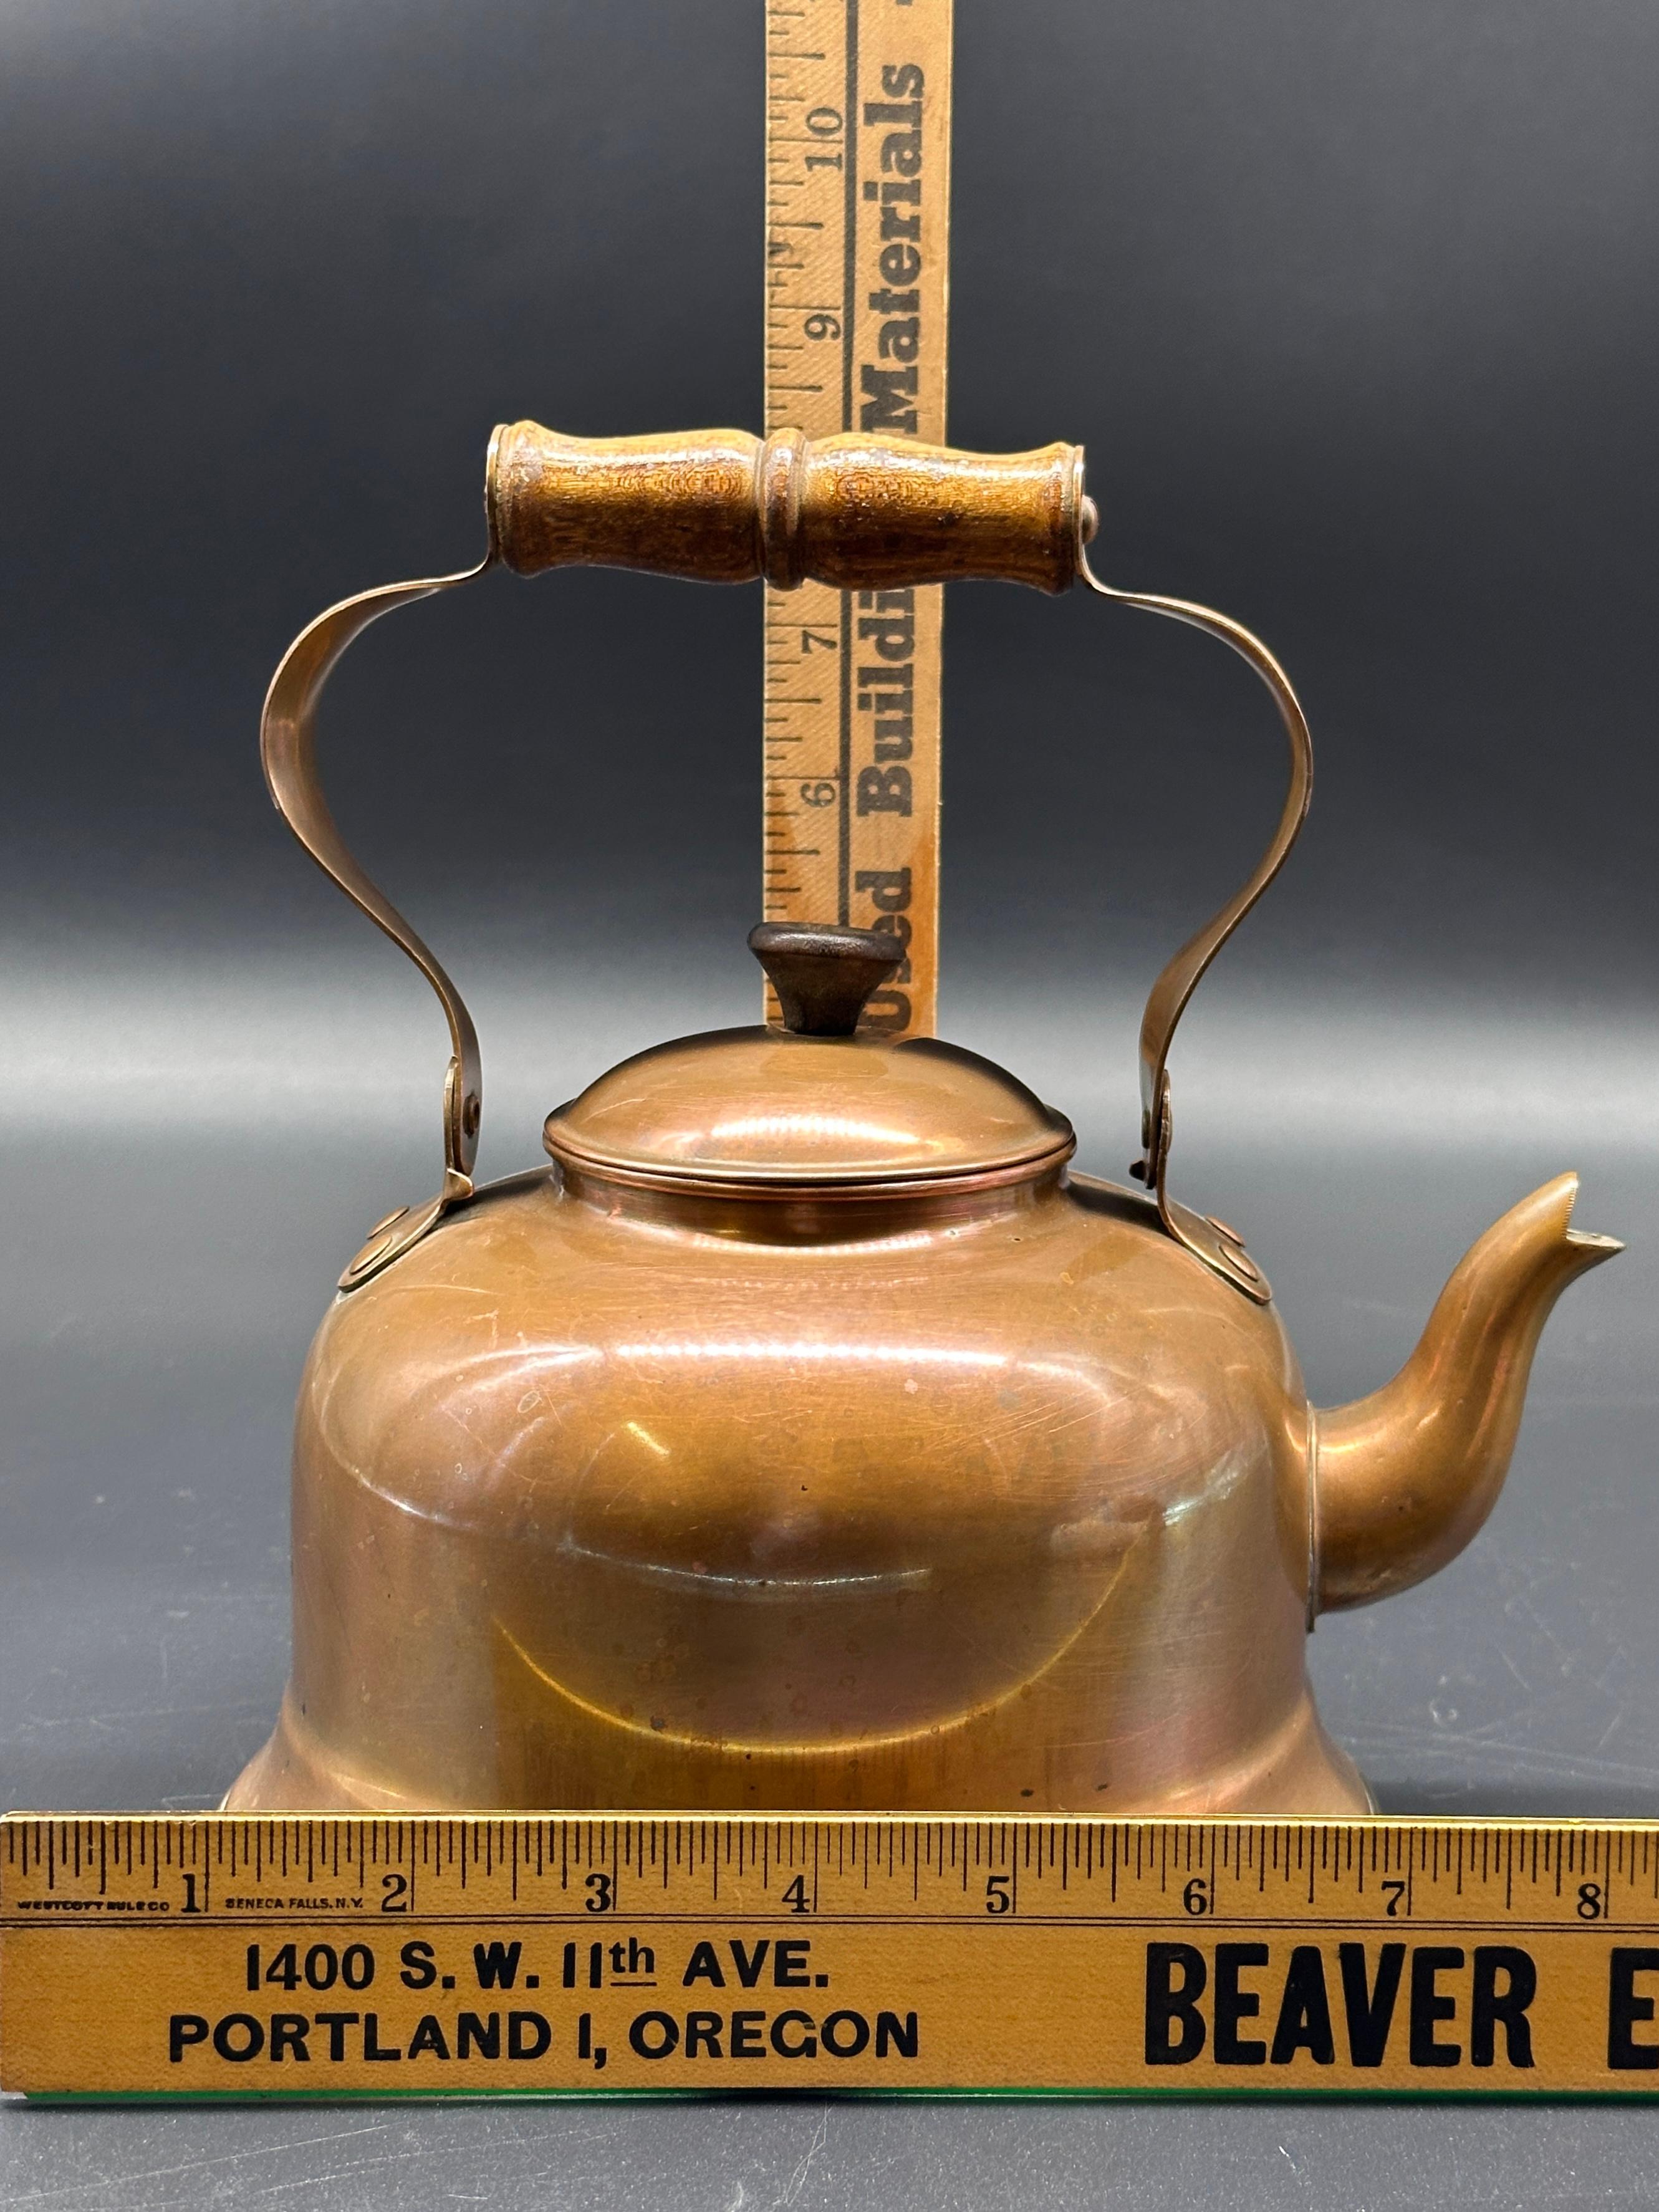 Copper Tea Kettle with Wooden Handle (Made in Portugal)